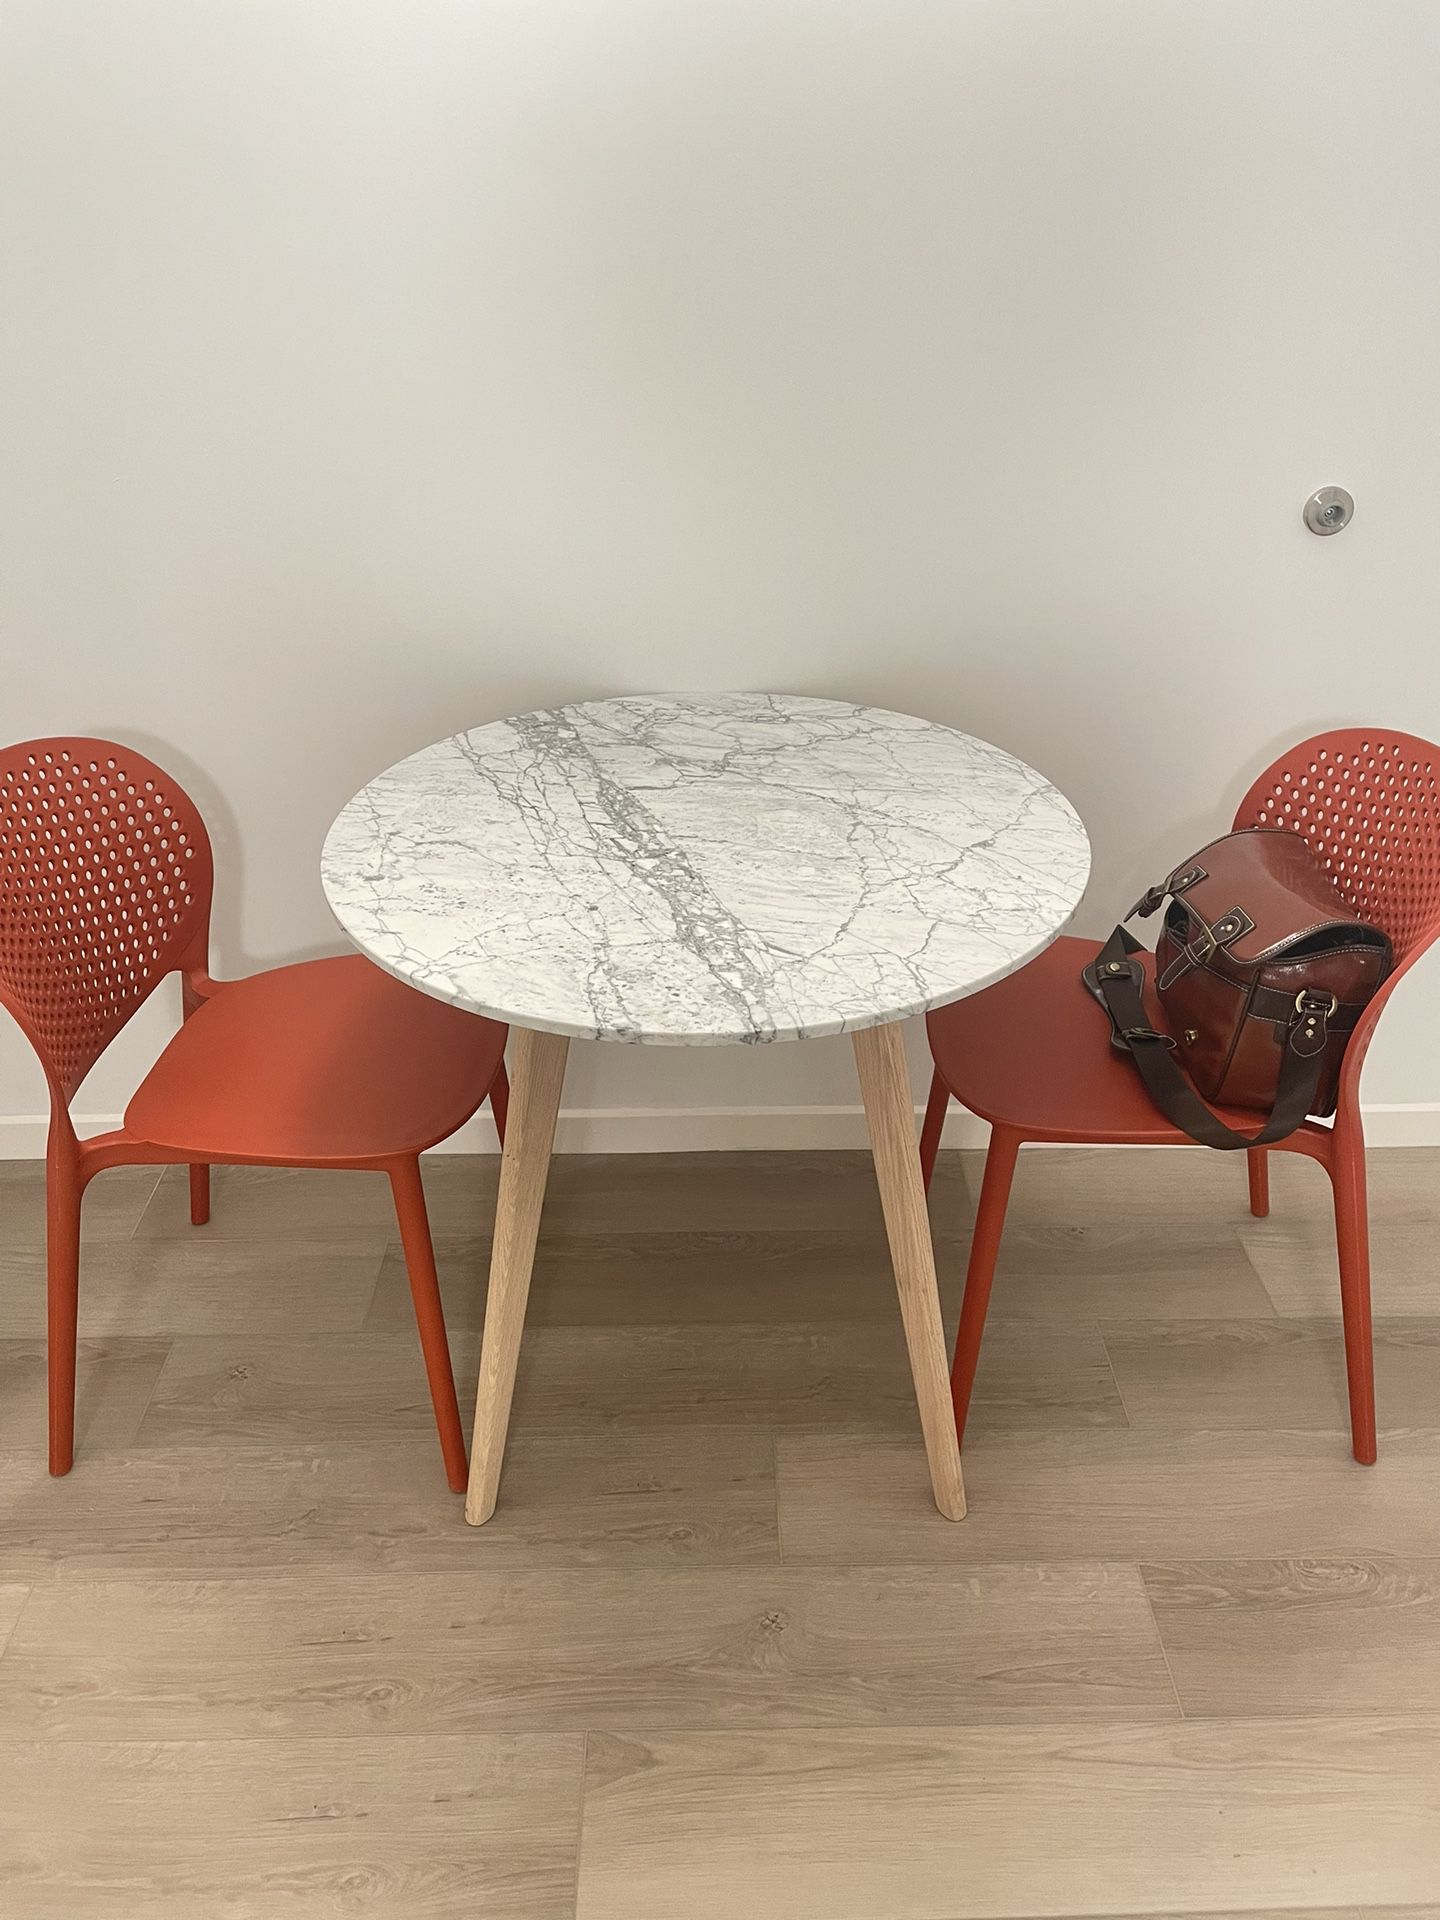 marble round table